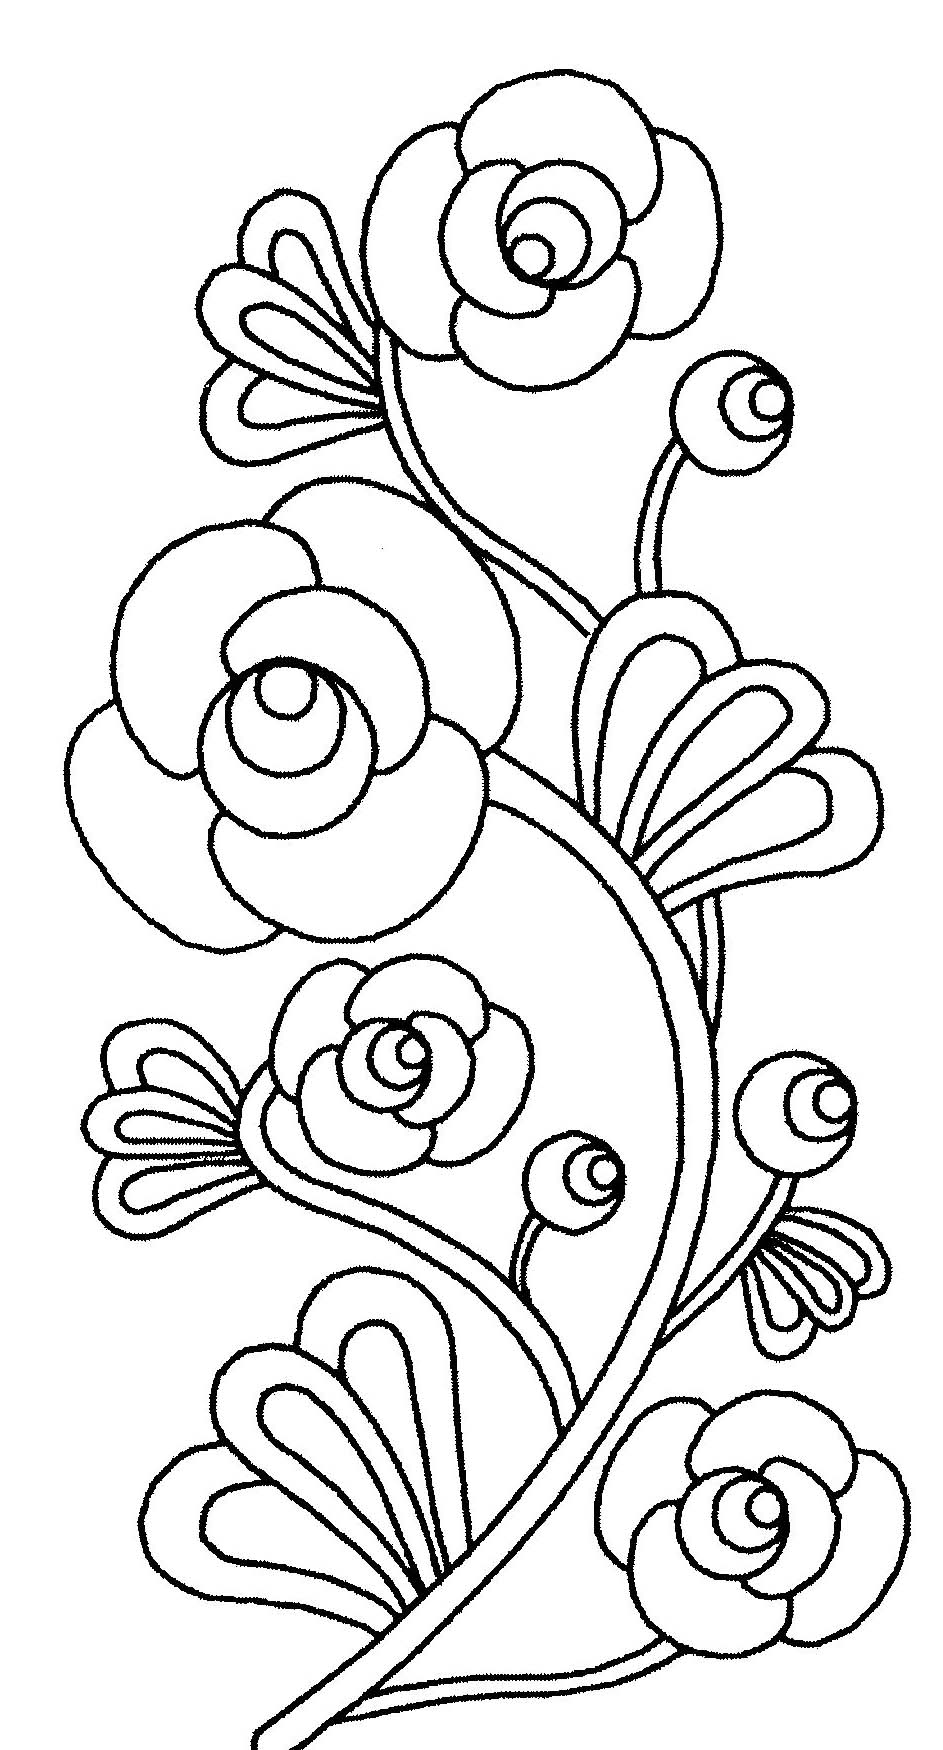 Beautiful Flowers coloring page to print and color